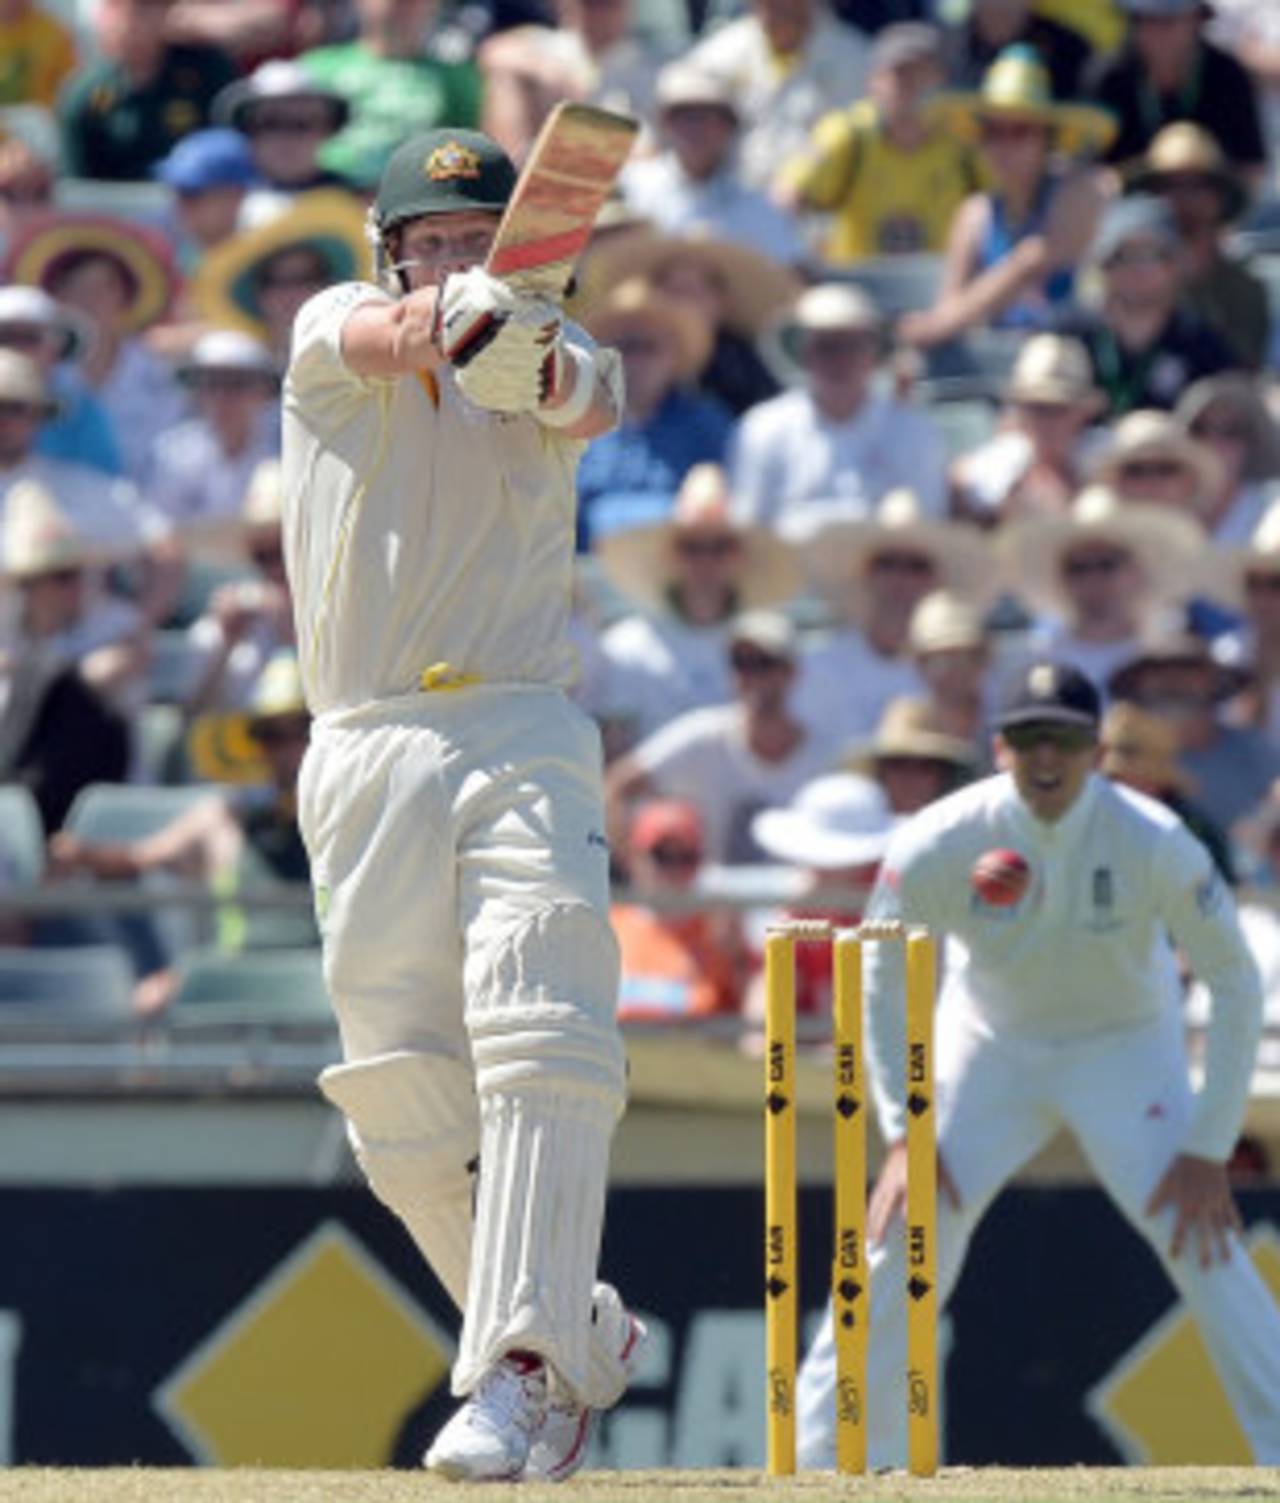 Steven Smith was strong on the pull, Australia v England, 3rd Test, Perth, 1st day, December 13, 2013